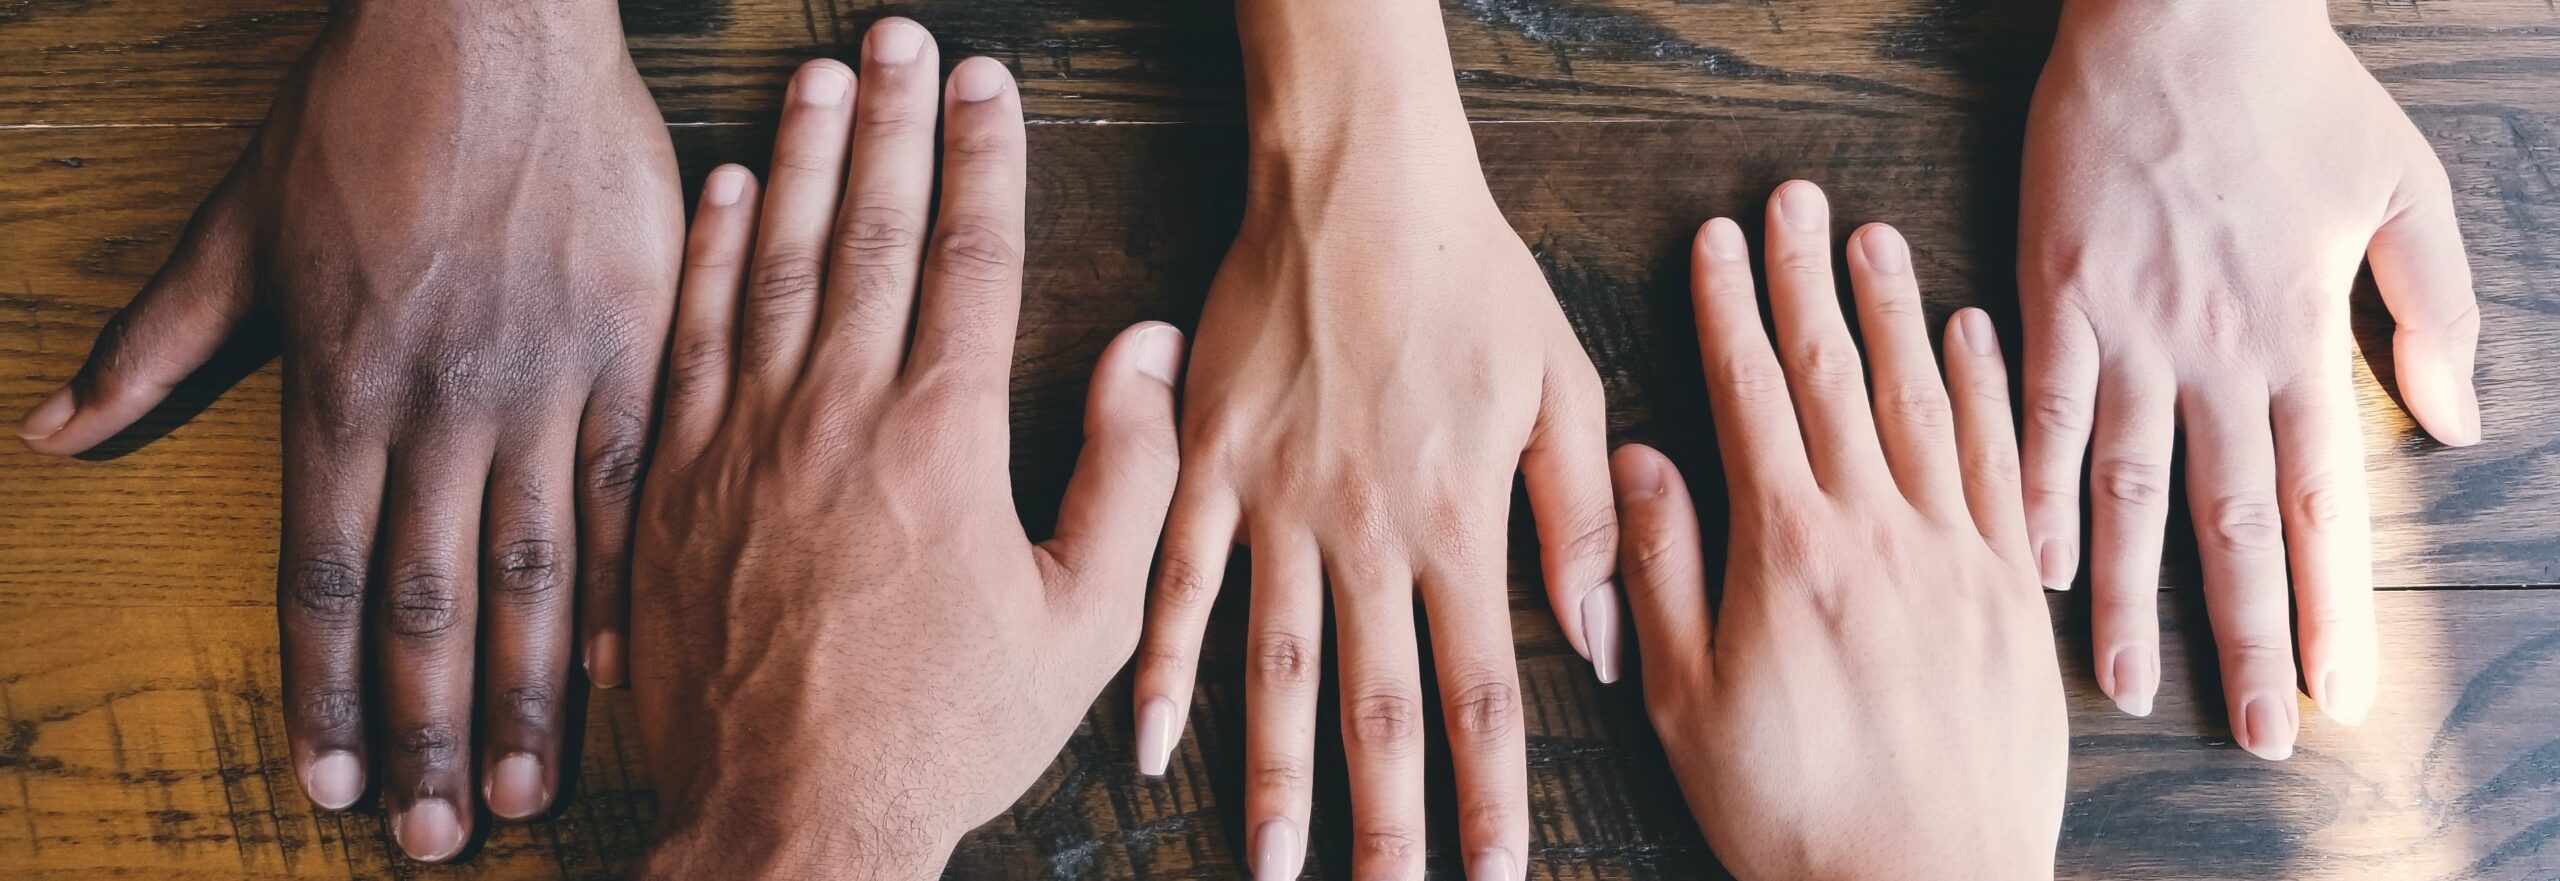 Hands of various skin tones, palm down, in a row on a table. 